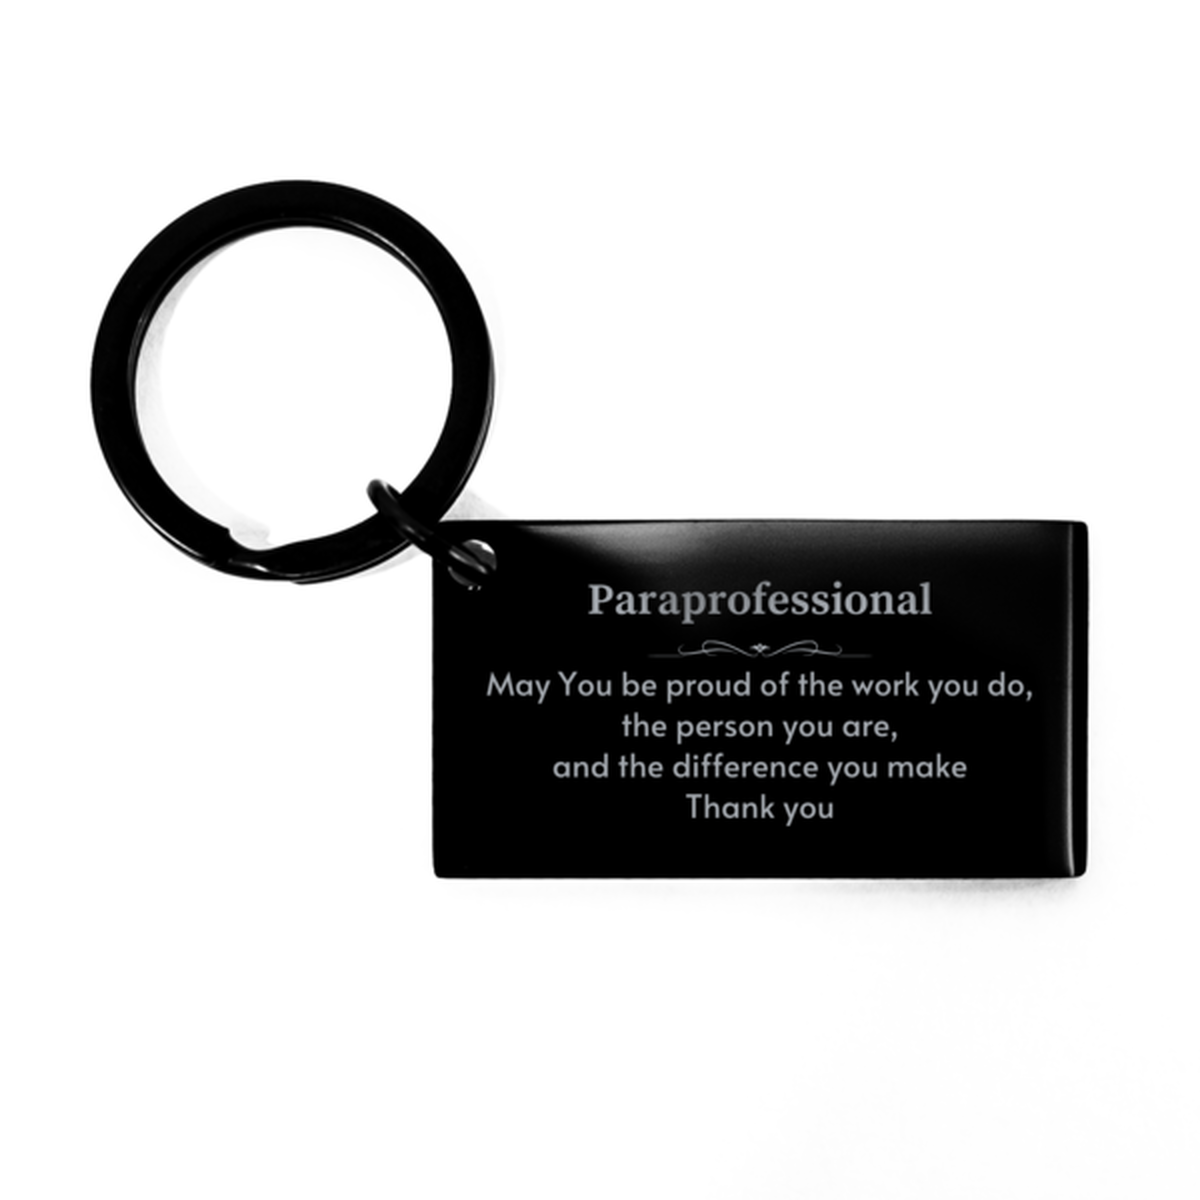 Heartwarming Keychain Retirement Coworkers Gifts for Paraprofessional, Psychiatrist May You be proud of the work you do, the person you are Gifts for Boss Men Women Friends